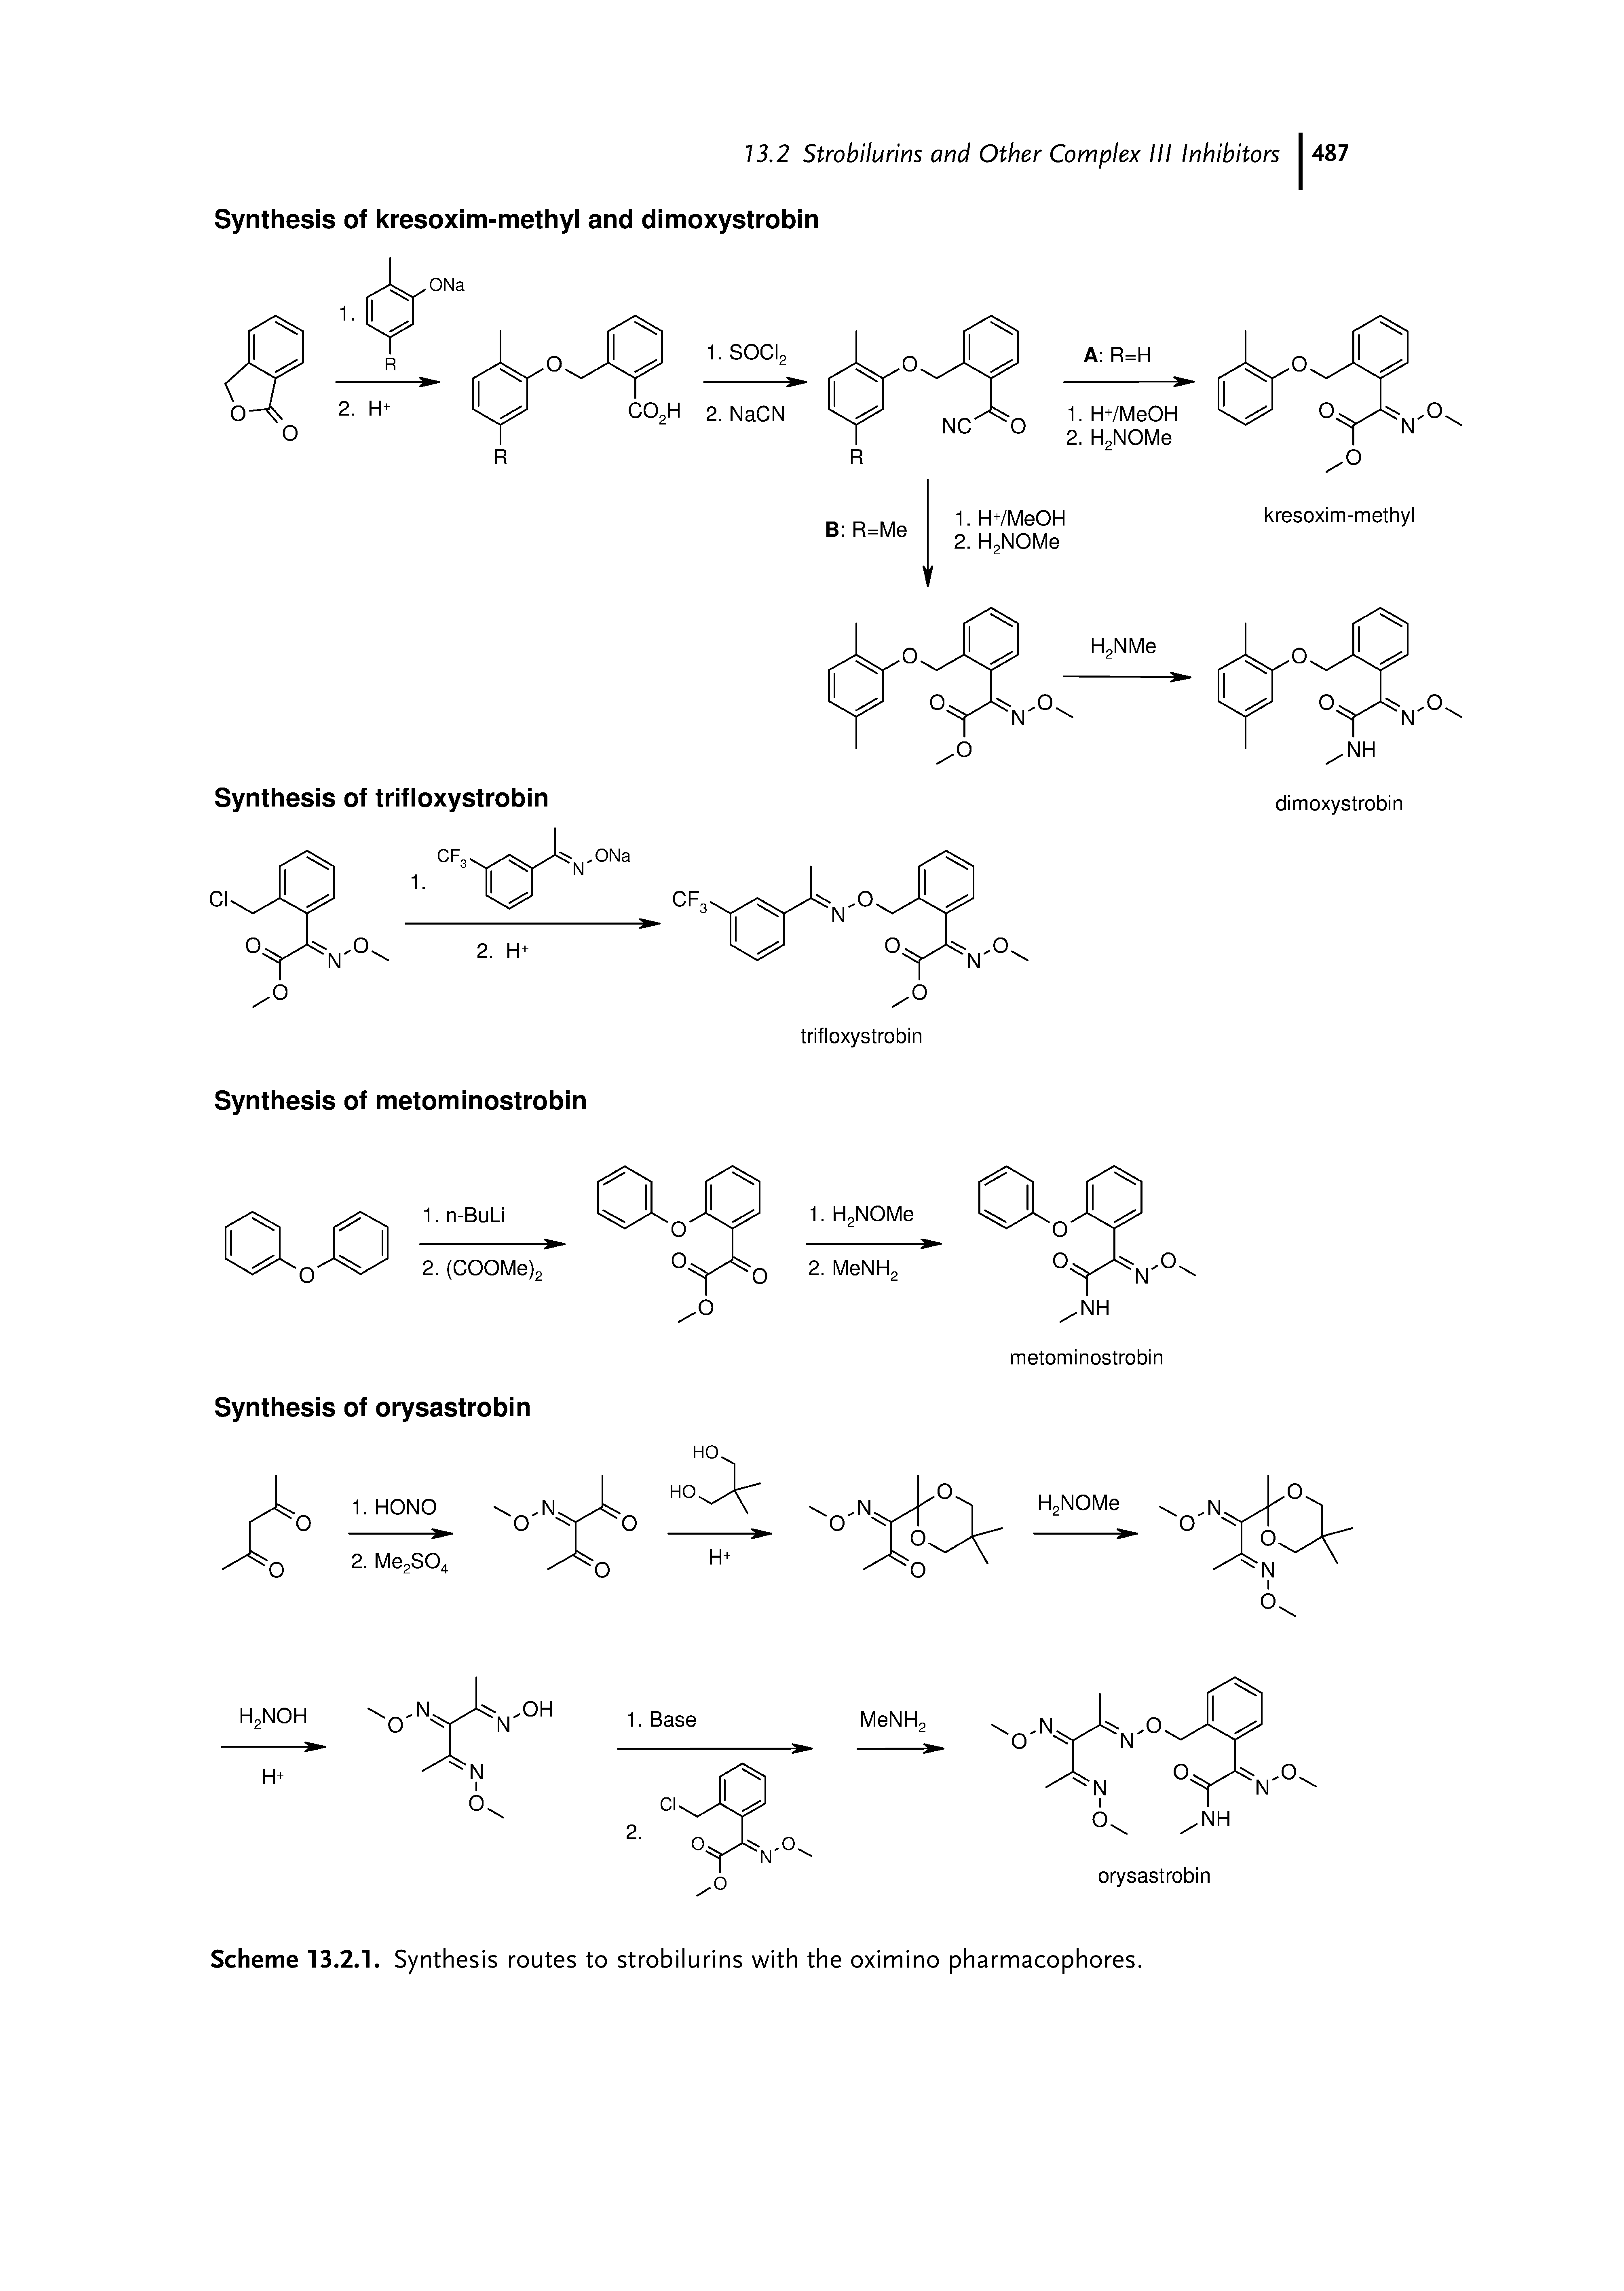 Scheme 13.2.1. Synthesis routes to strobilurins with the oximino pharmacophores.